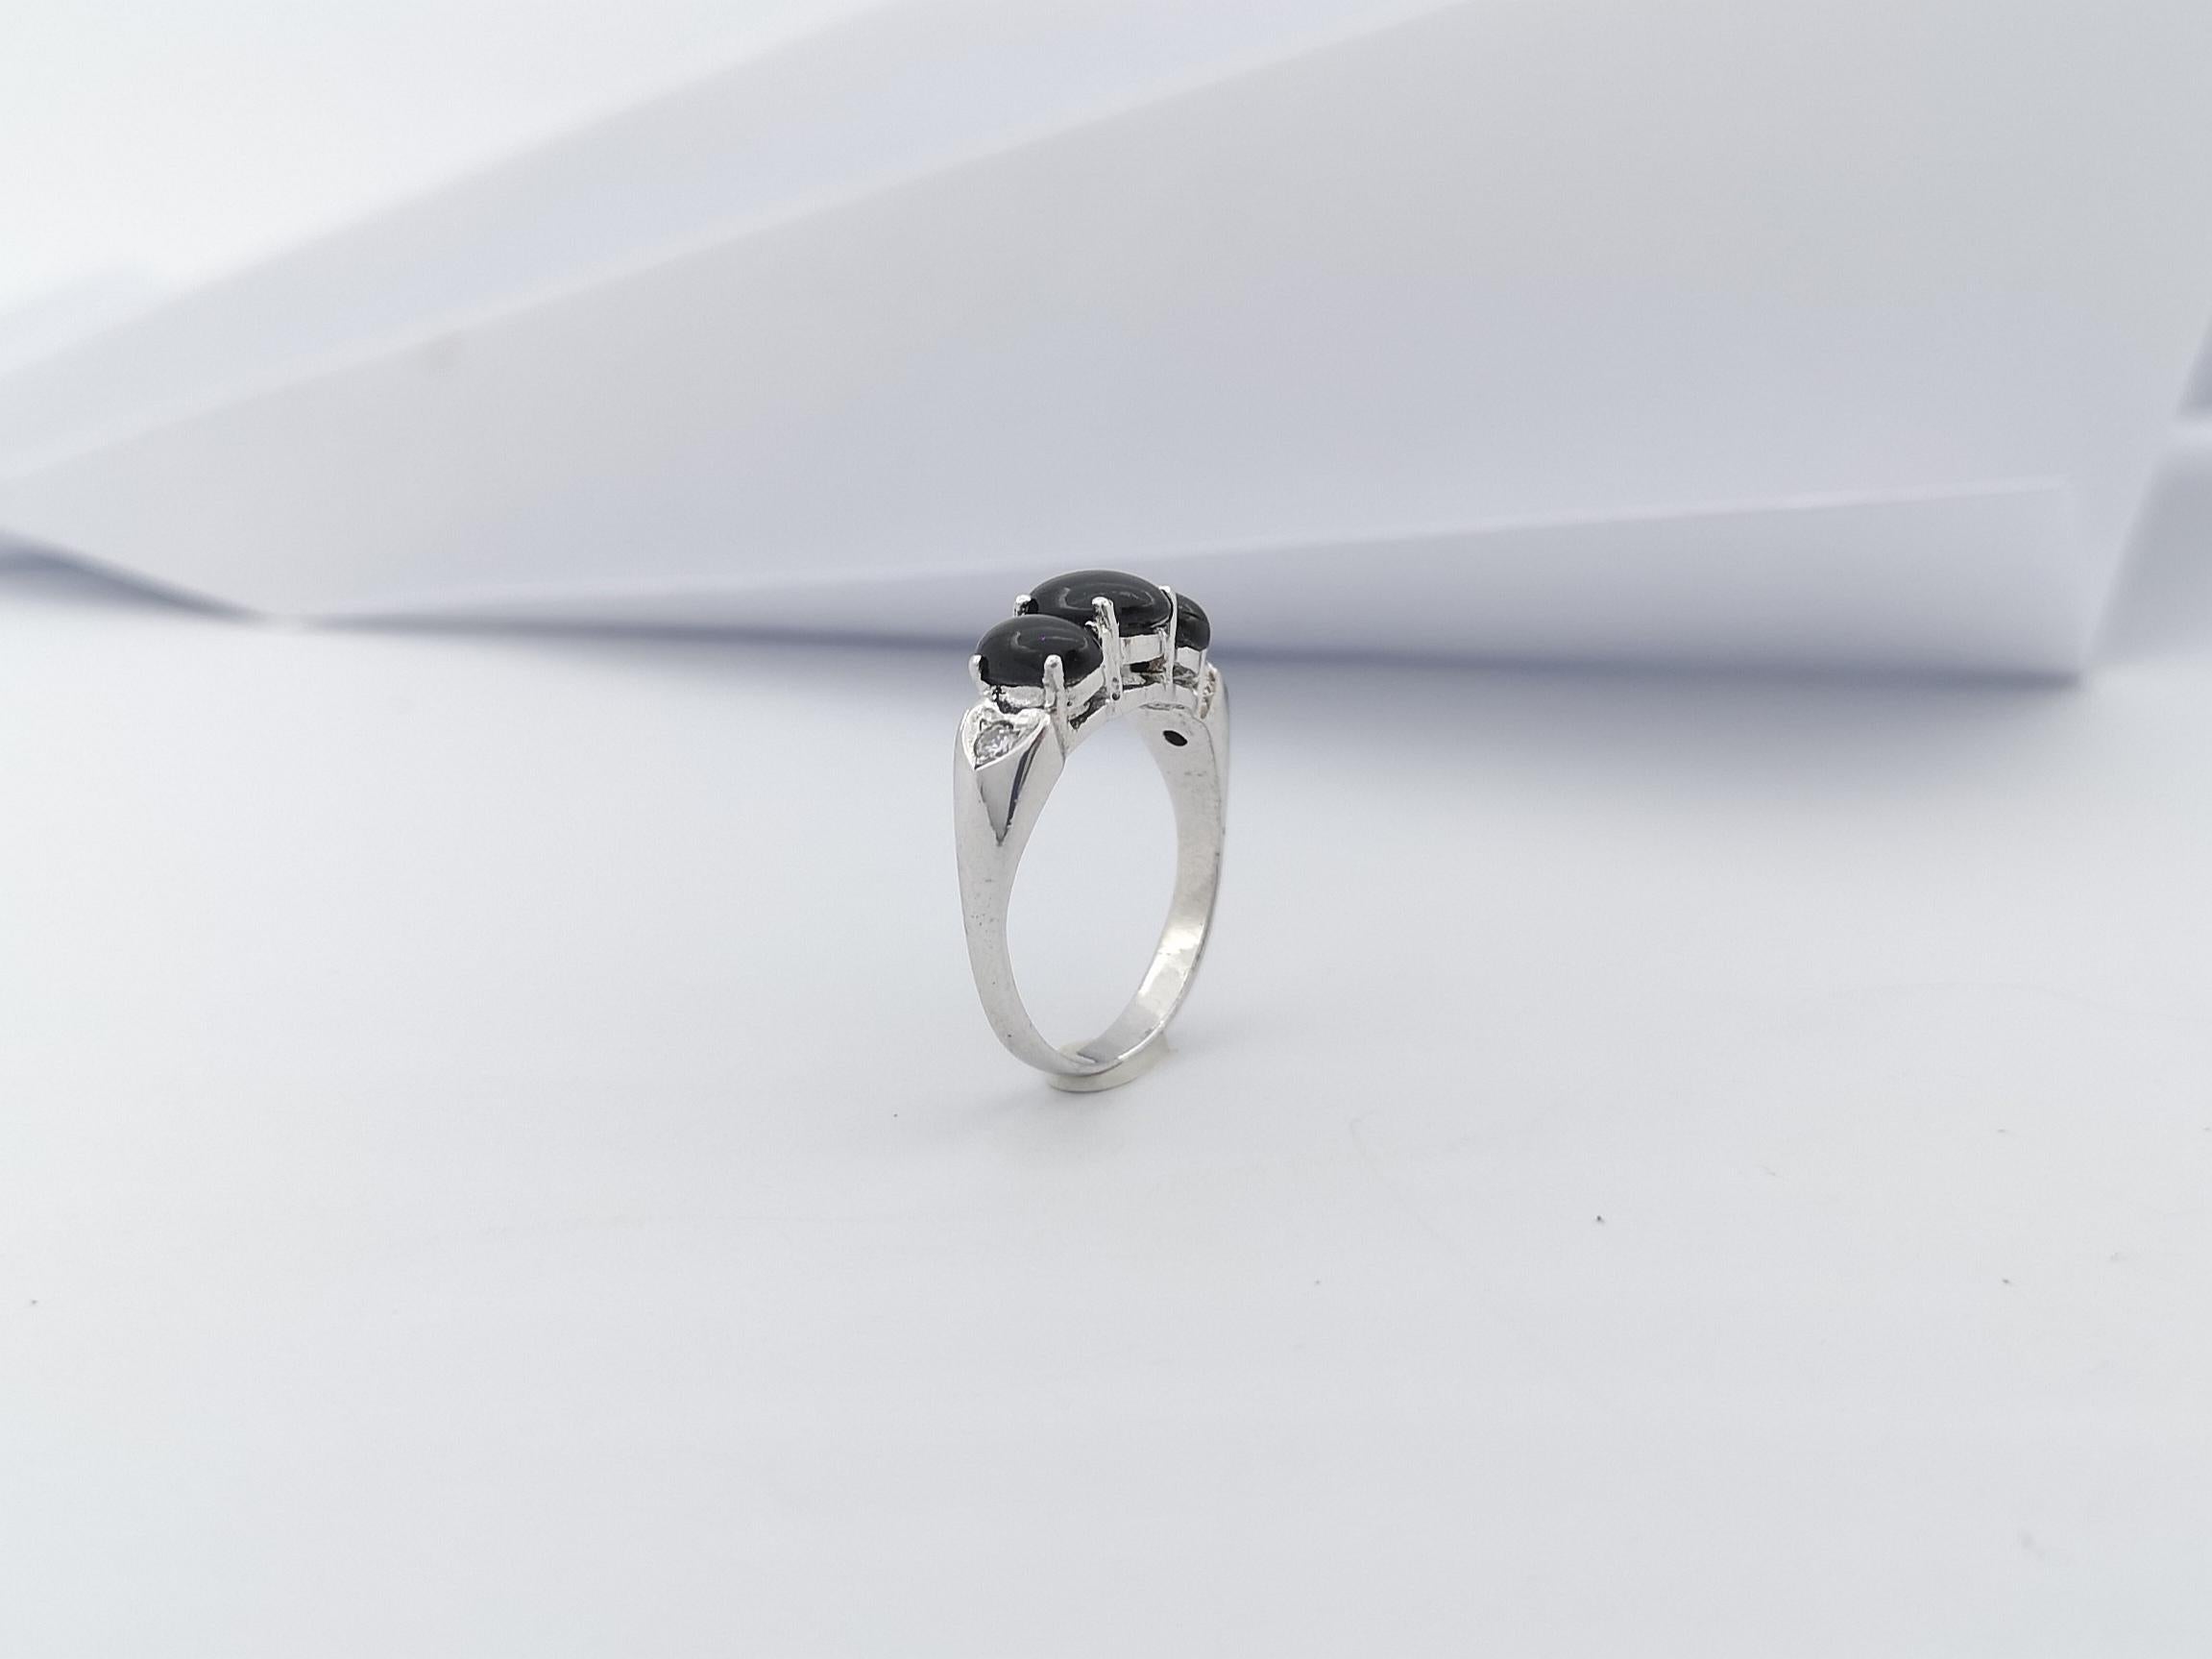 Black Star Sapphire with Cubic Zirconia Ring set in Silver Settings 6